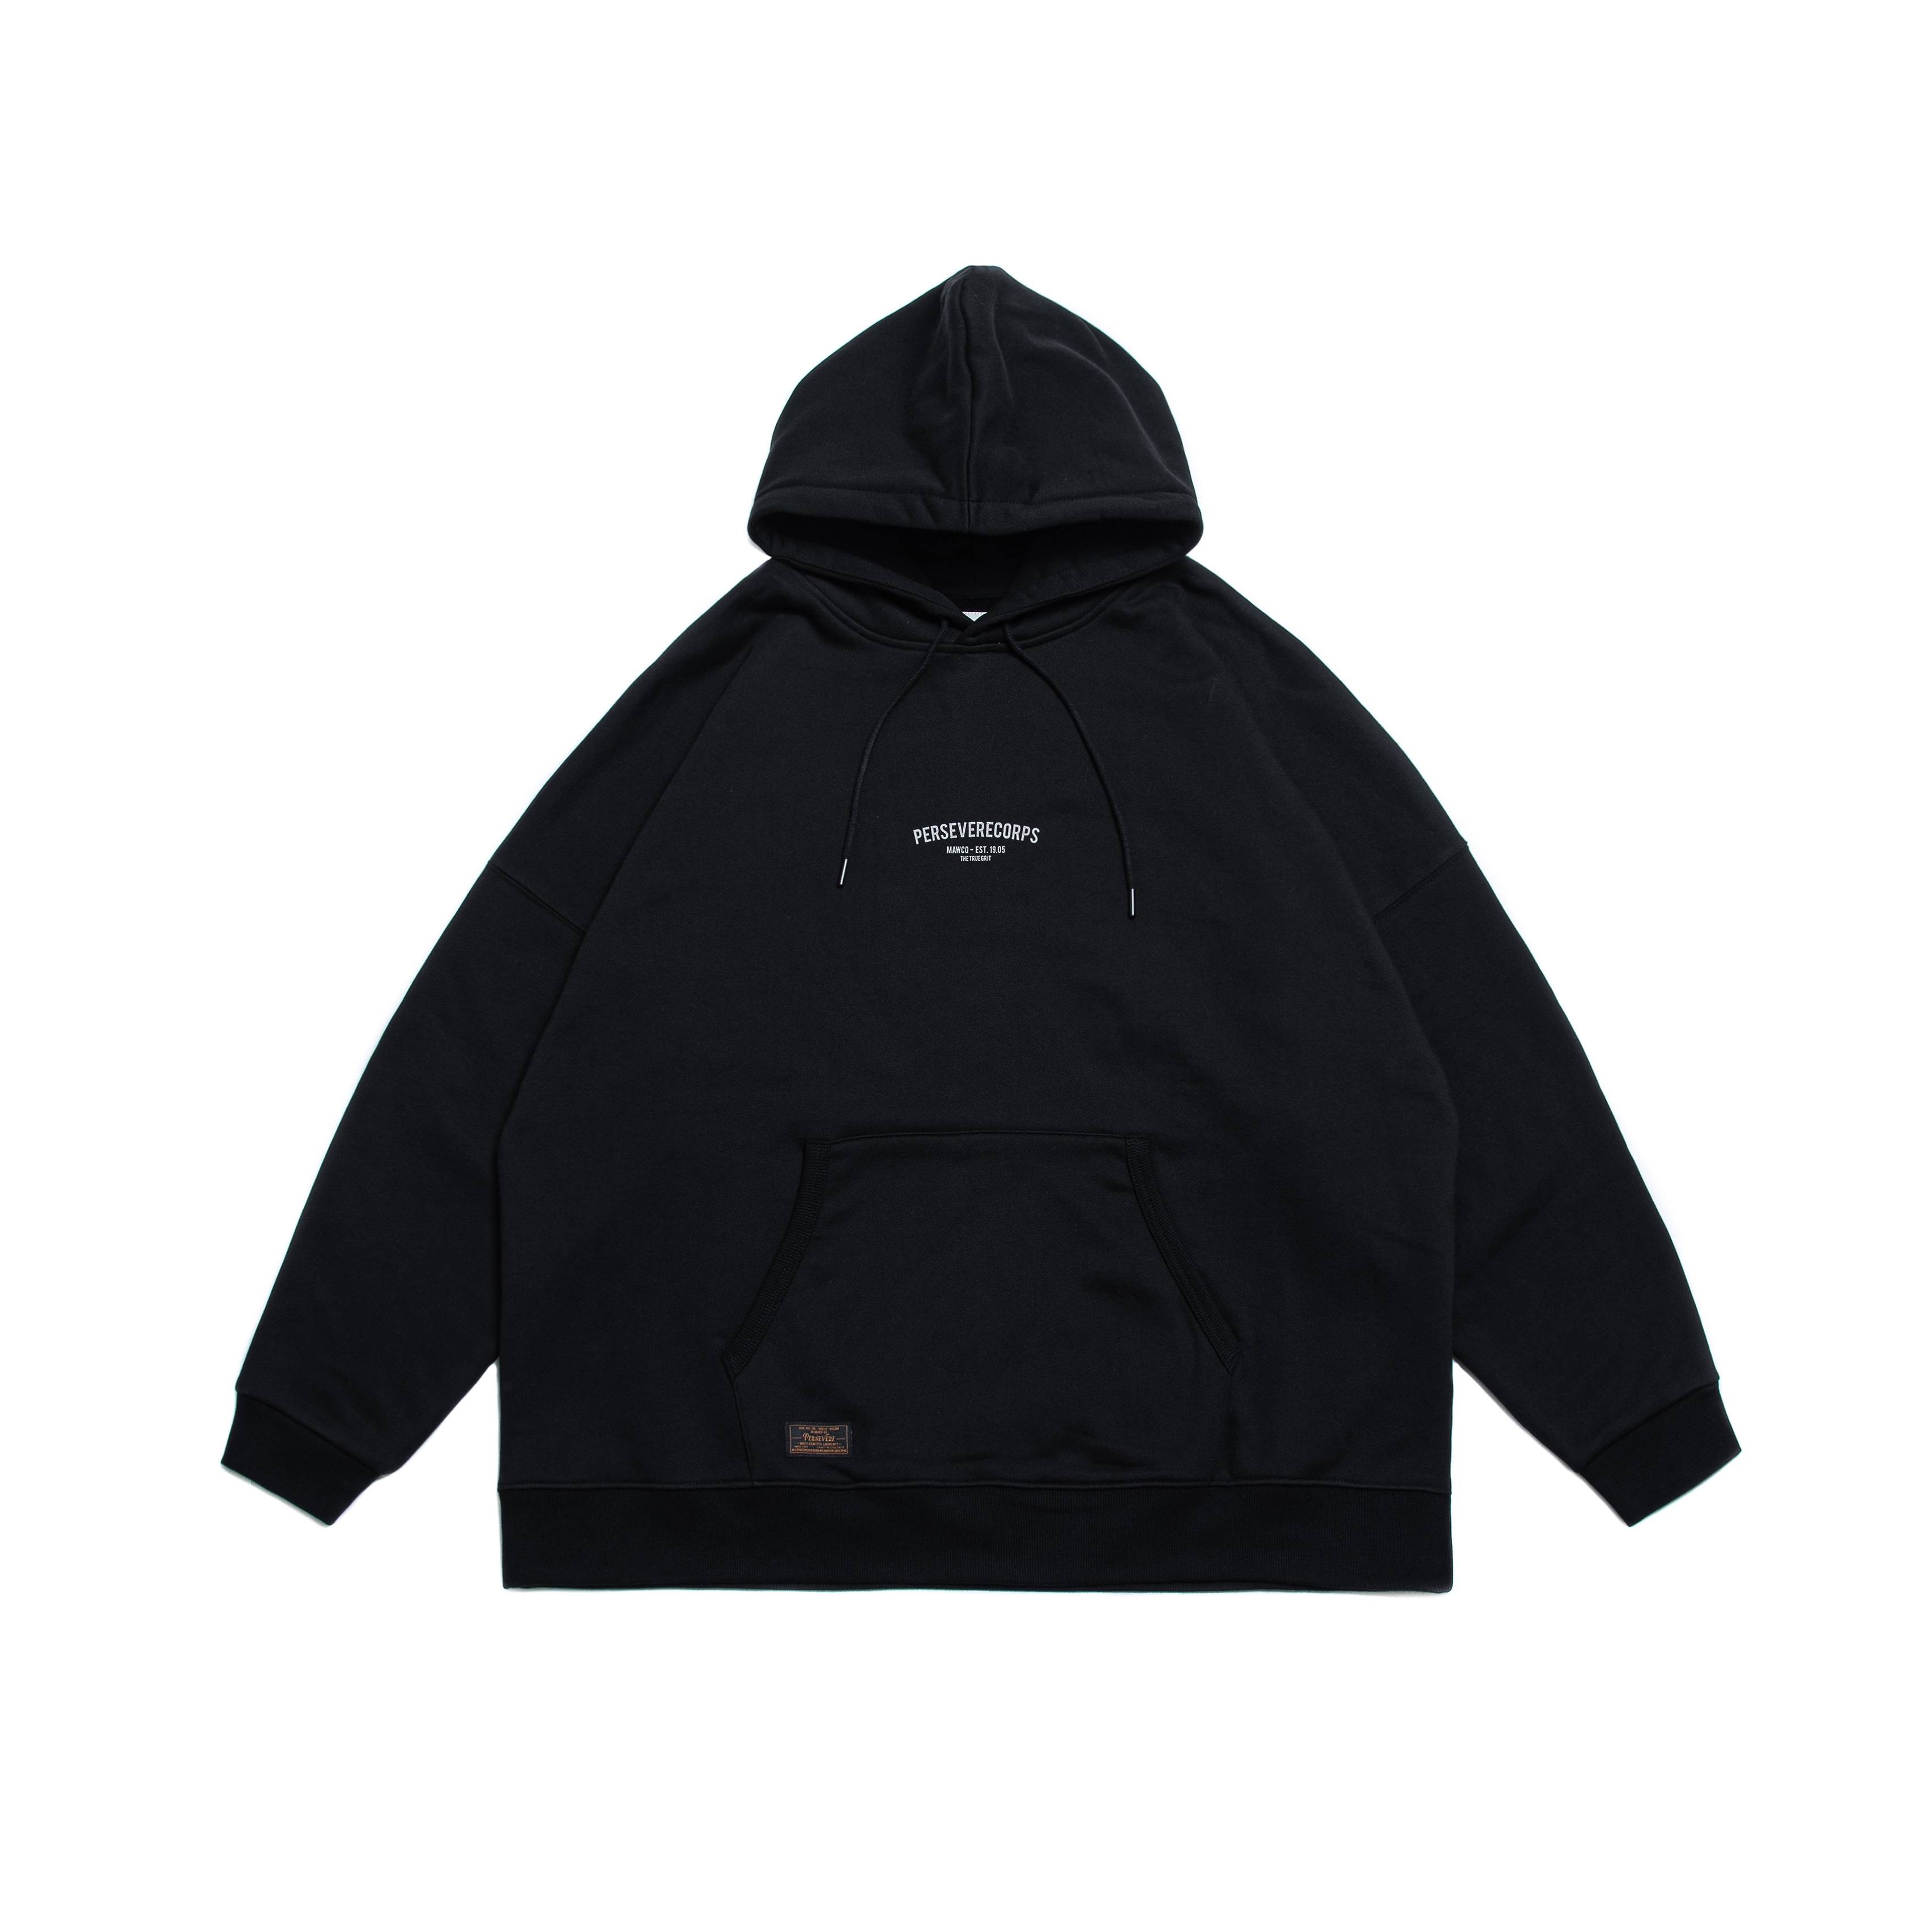 PERSEVERE IRSA. CLASSIC WASHED HOODIE - BLACK